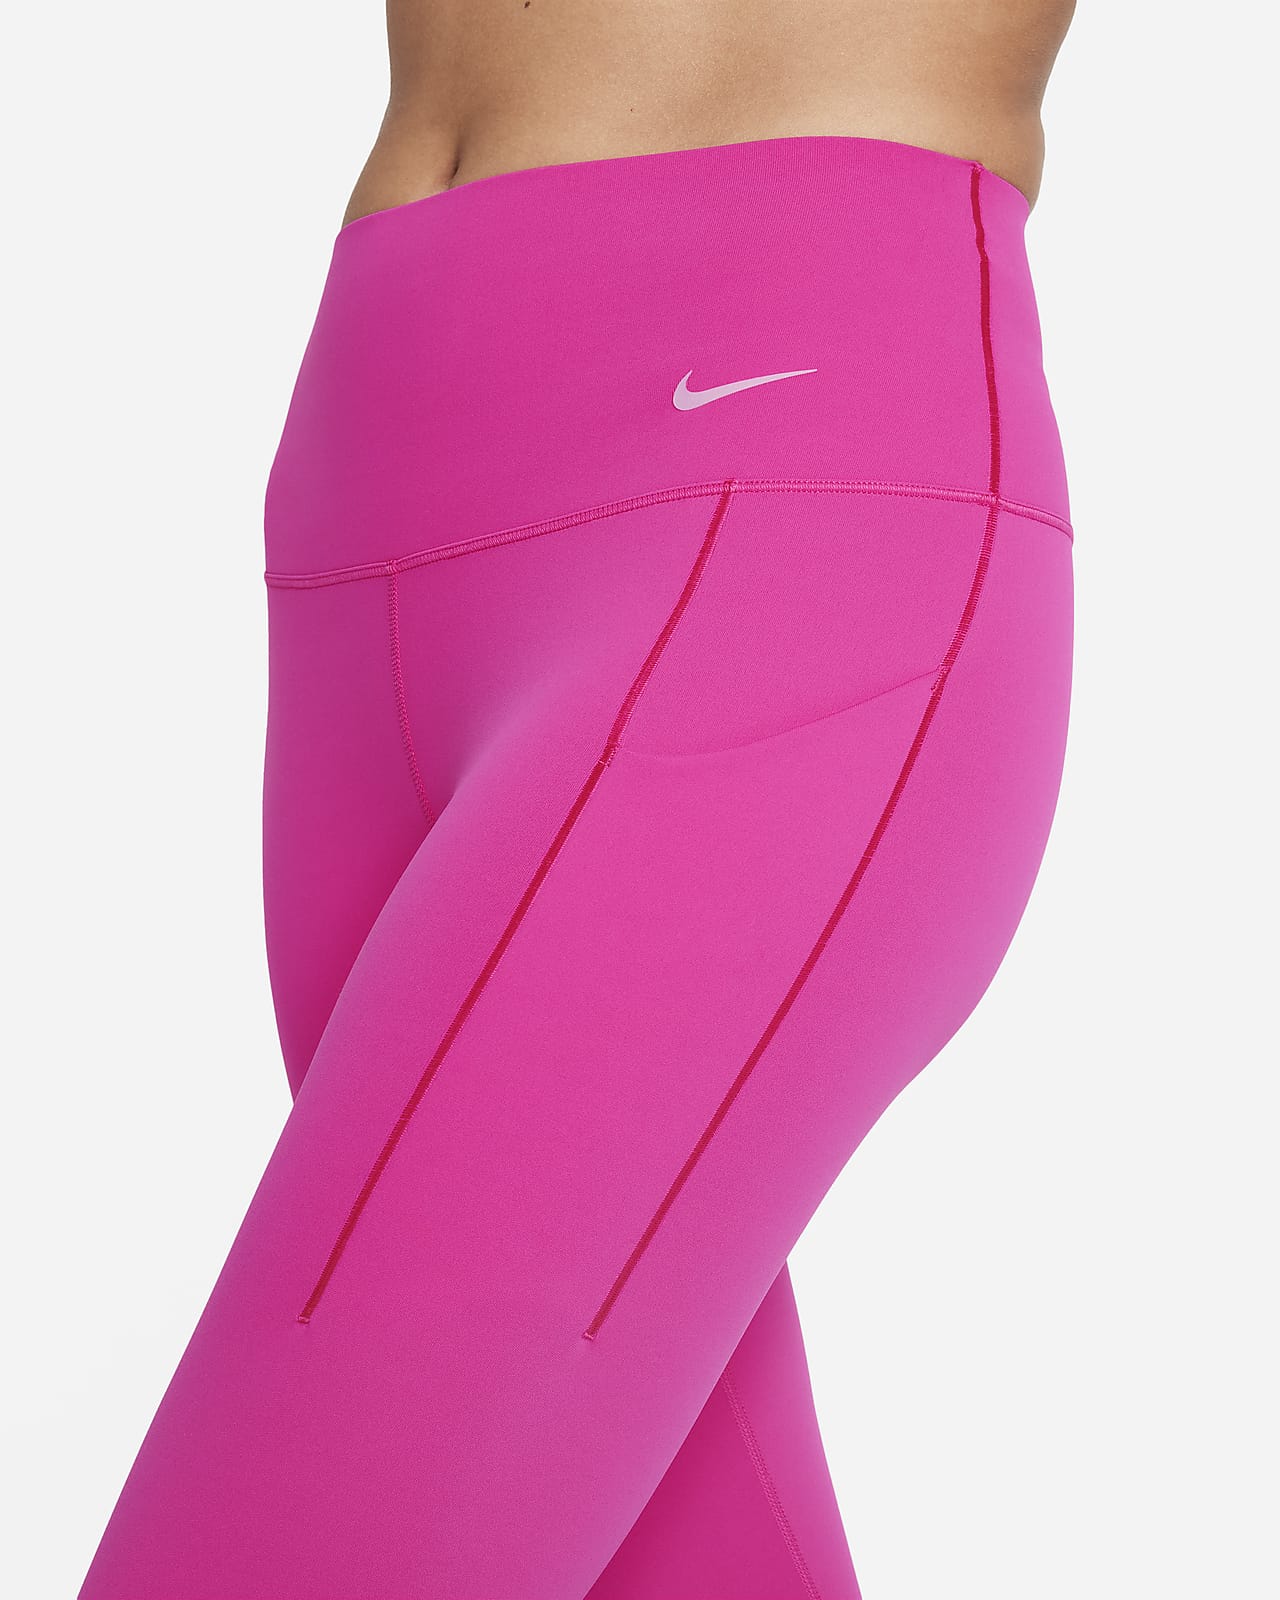 Nike Women's Power 7/8 High Waist Training Floral Tight Pants - S, Women's  Fashion, Activewear on Carousell